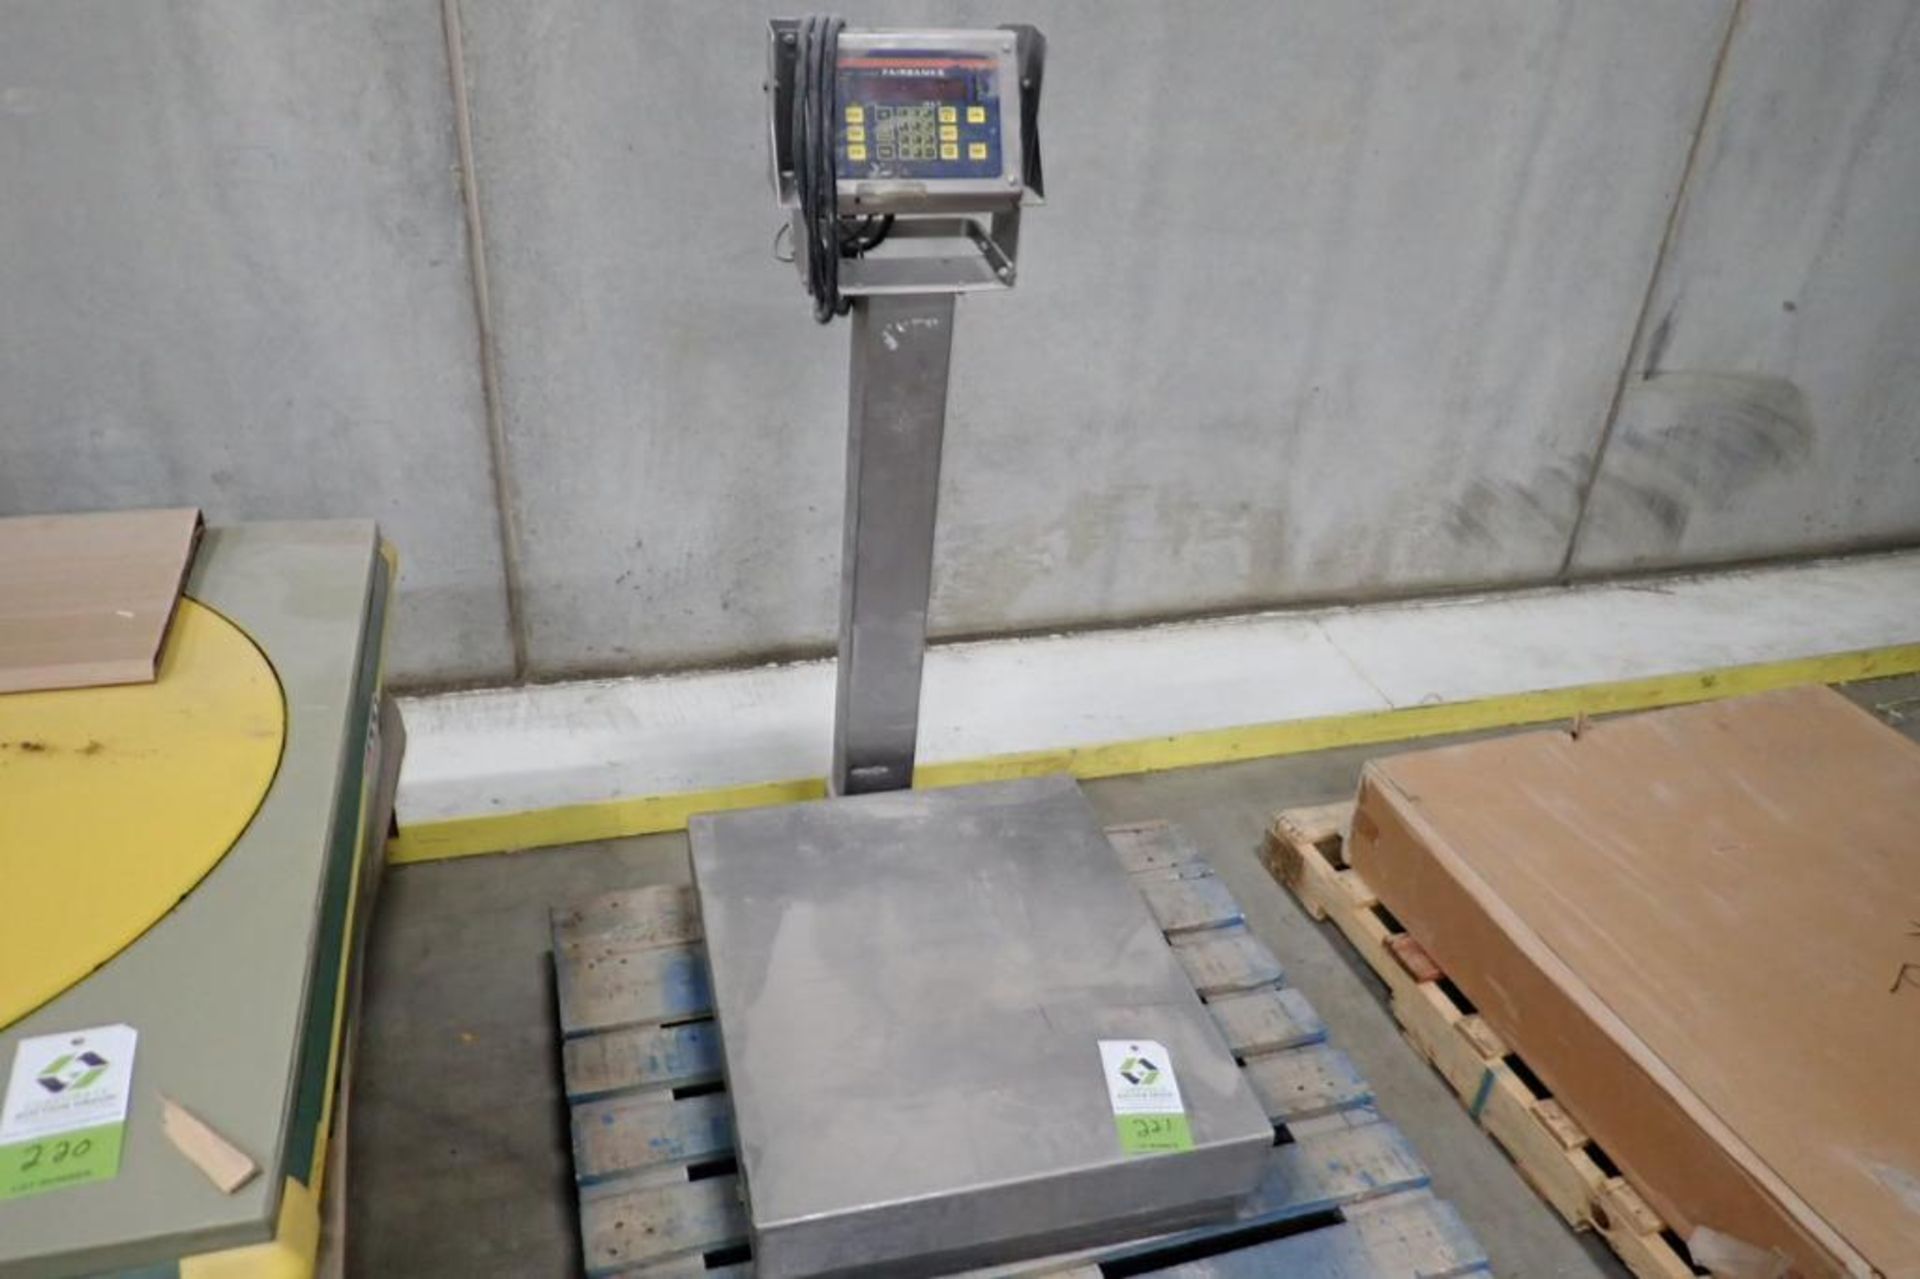 Fairbanks scale, 28 in. long x 23 in. wide platform, Model. **Rigging Fee: $50** (Located in Brookly